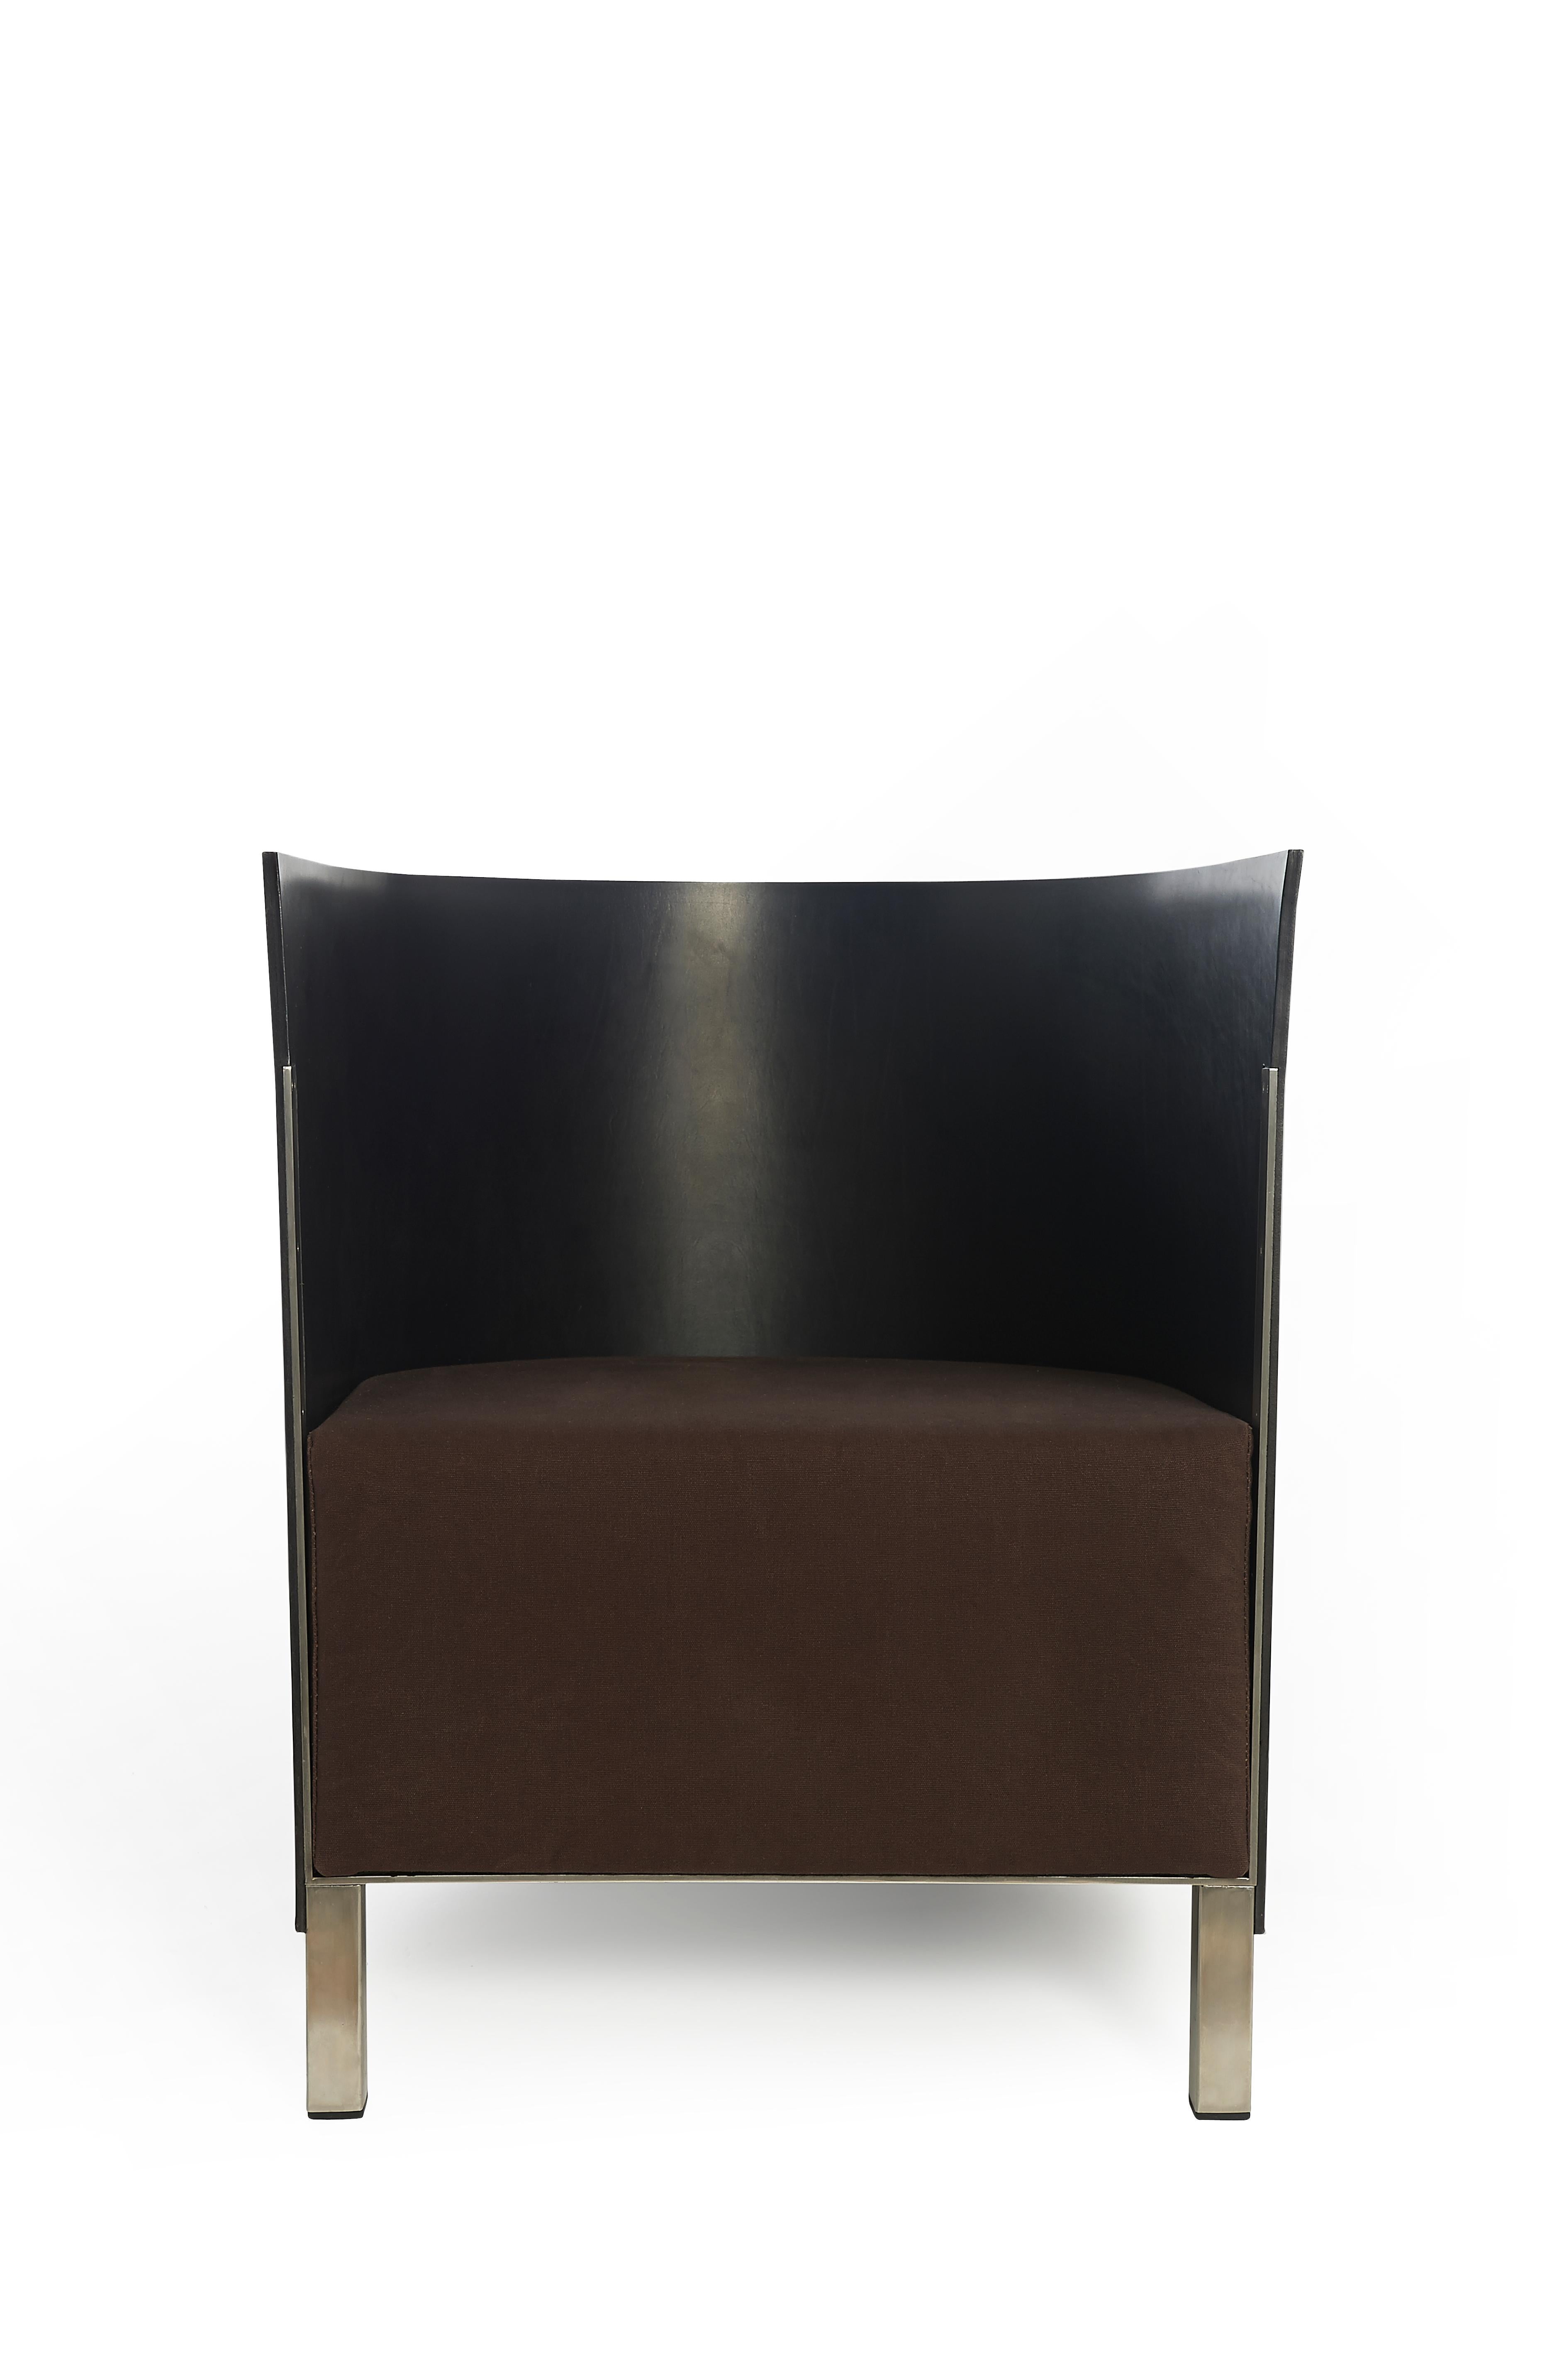 The Lensvelt MVS S88 black leather chair is designed by Maarten van Severen. It is a low armchair. Materials: the backrest is made of black saddle leather, seat of brown canvas and the frame is stainless steel.
  